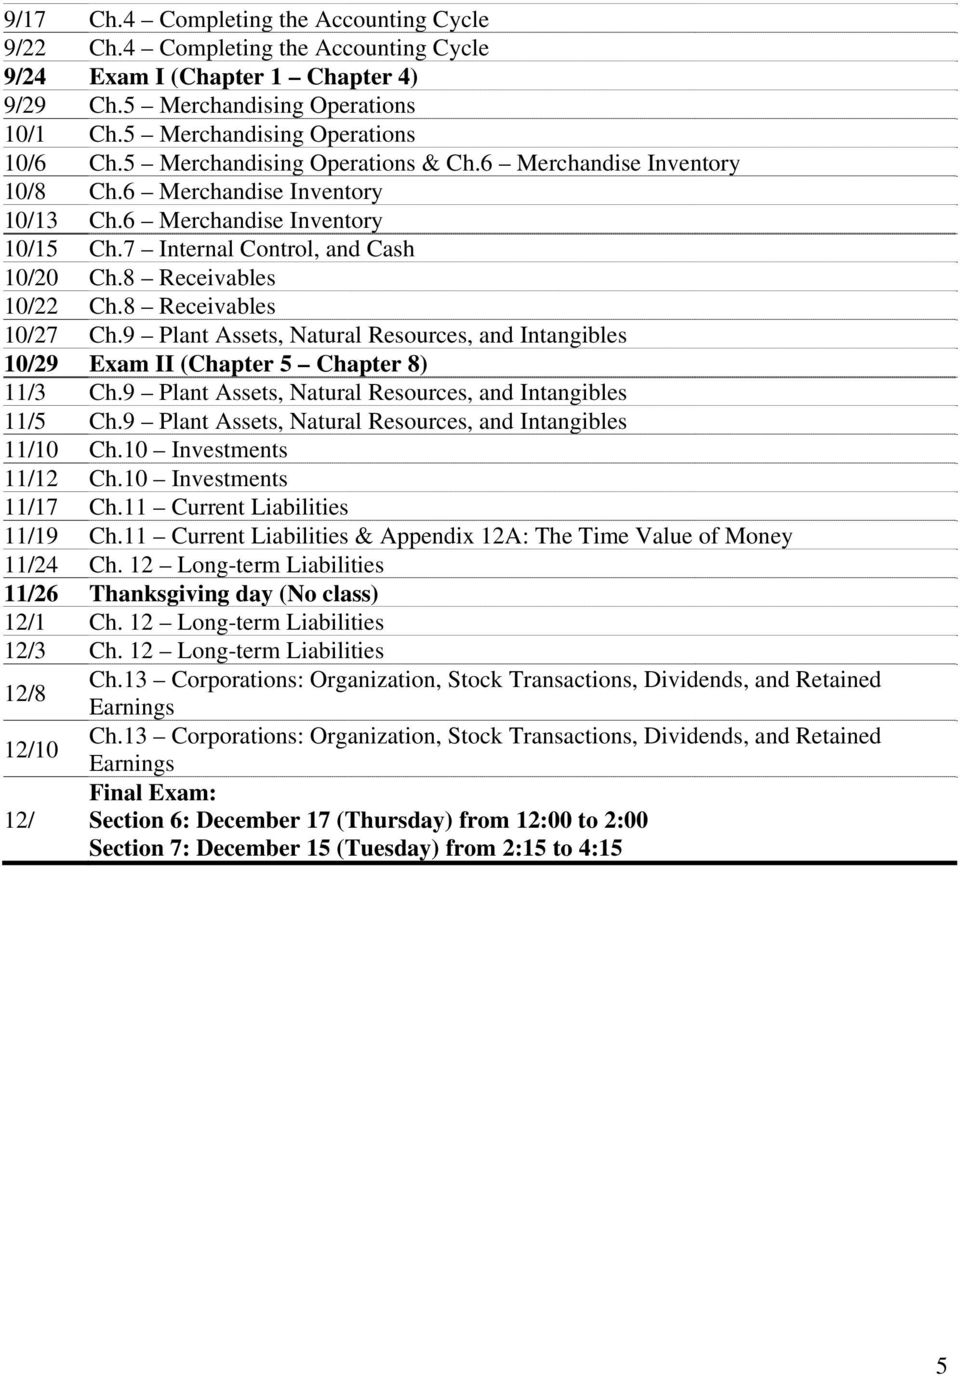 8 Receivables 10/27 Ch.9 Plant Assets, Natural Resources, and Intangibles 10/29 Exam II (Chapter 5 Chapter 8) 11/3 Ch.9 Plant Assets, Natural Resources, and Intangibles 11/5 Ch.